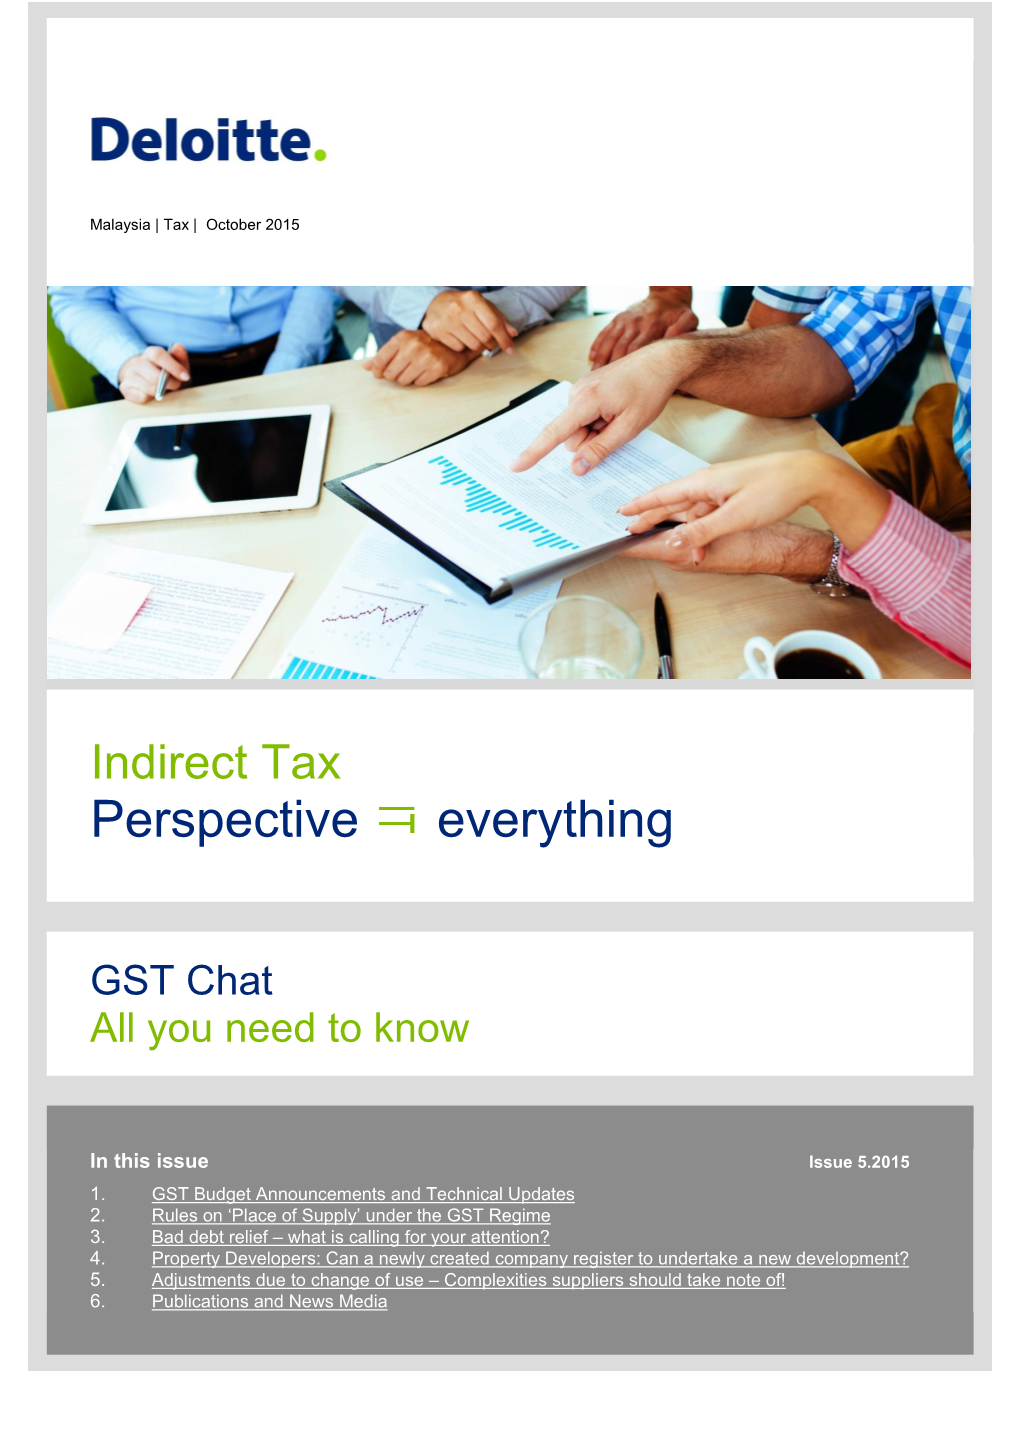 Indirect Tax Perspective Everything